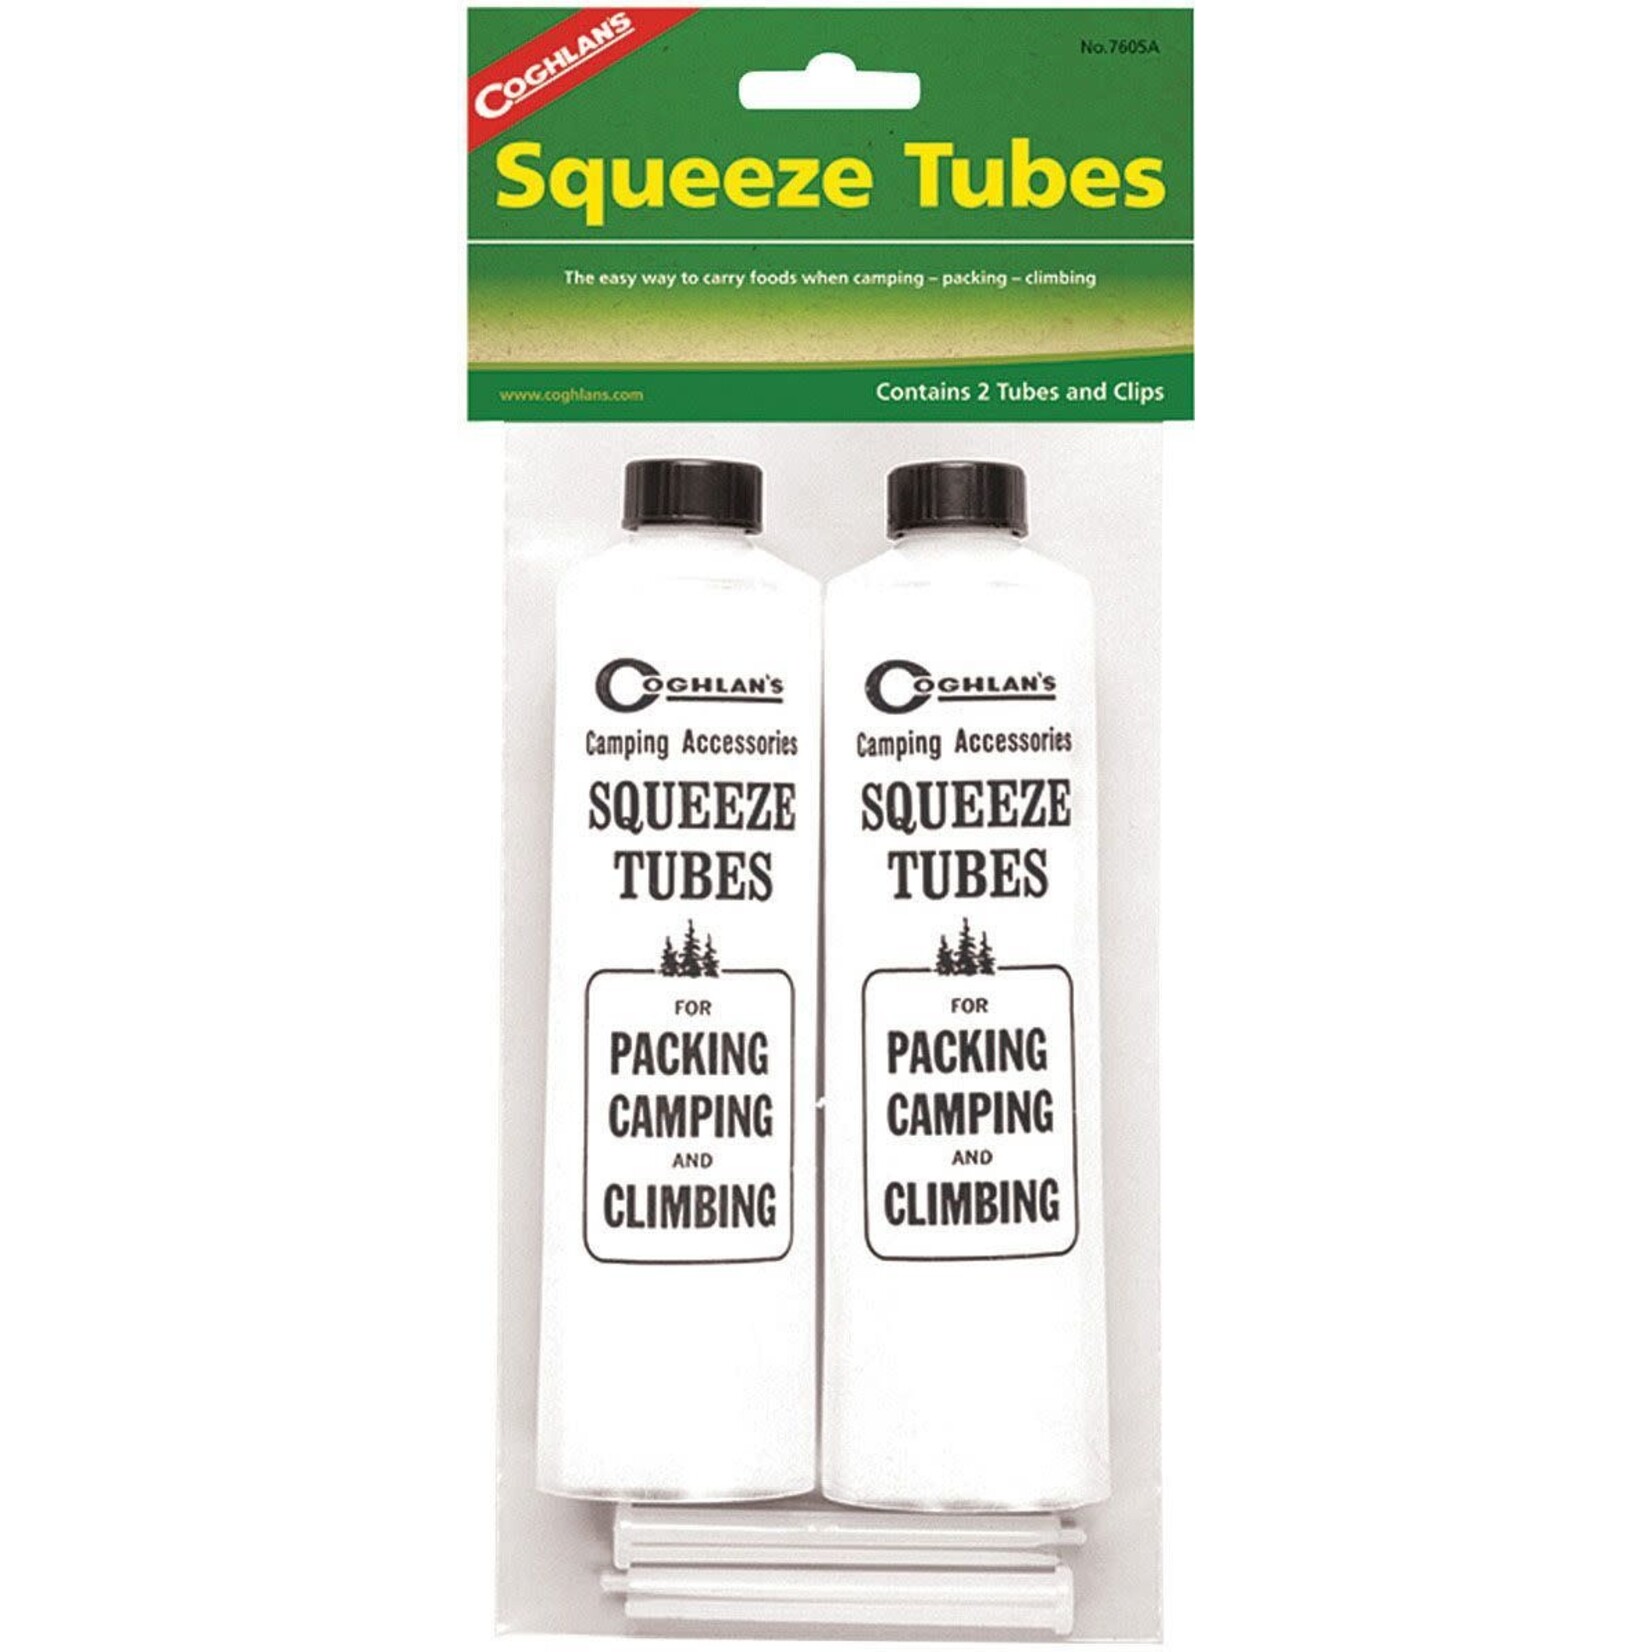 SQUEEZE TUBES 2 PK